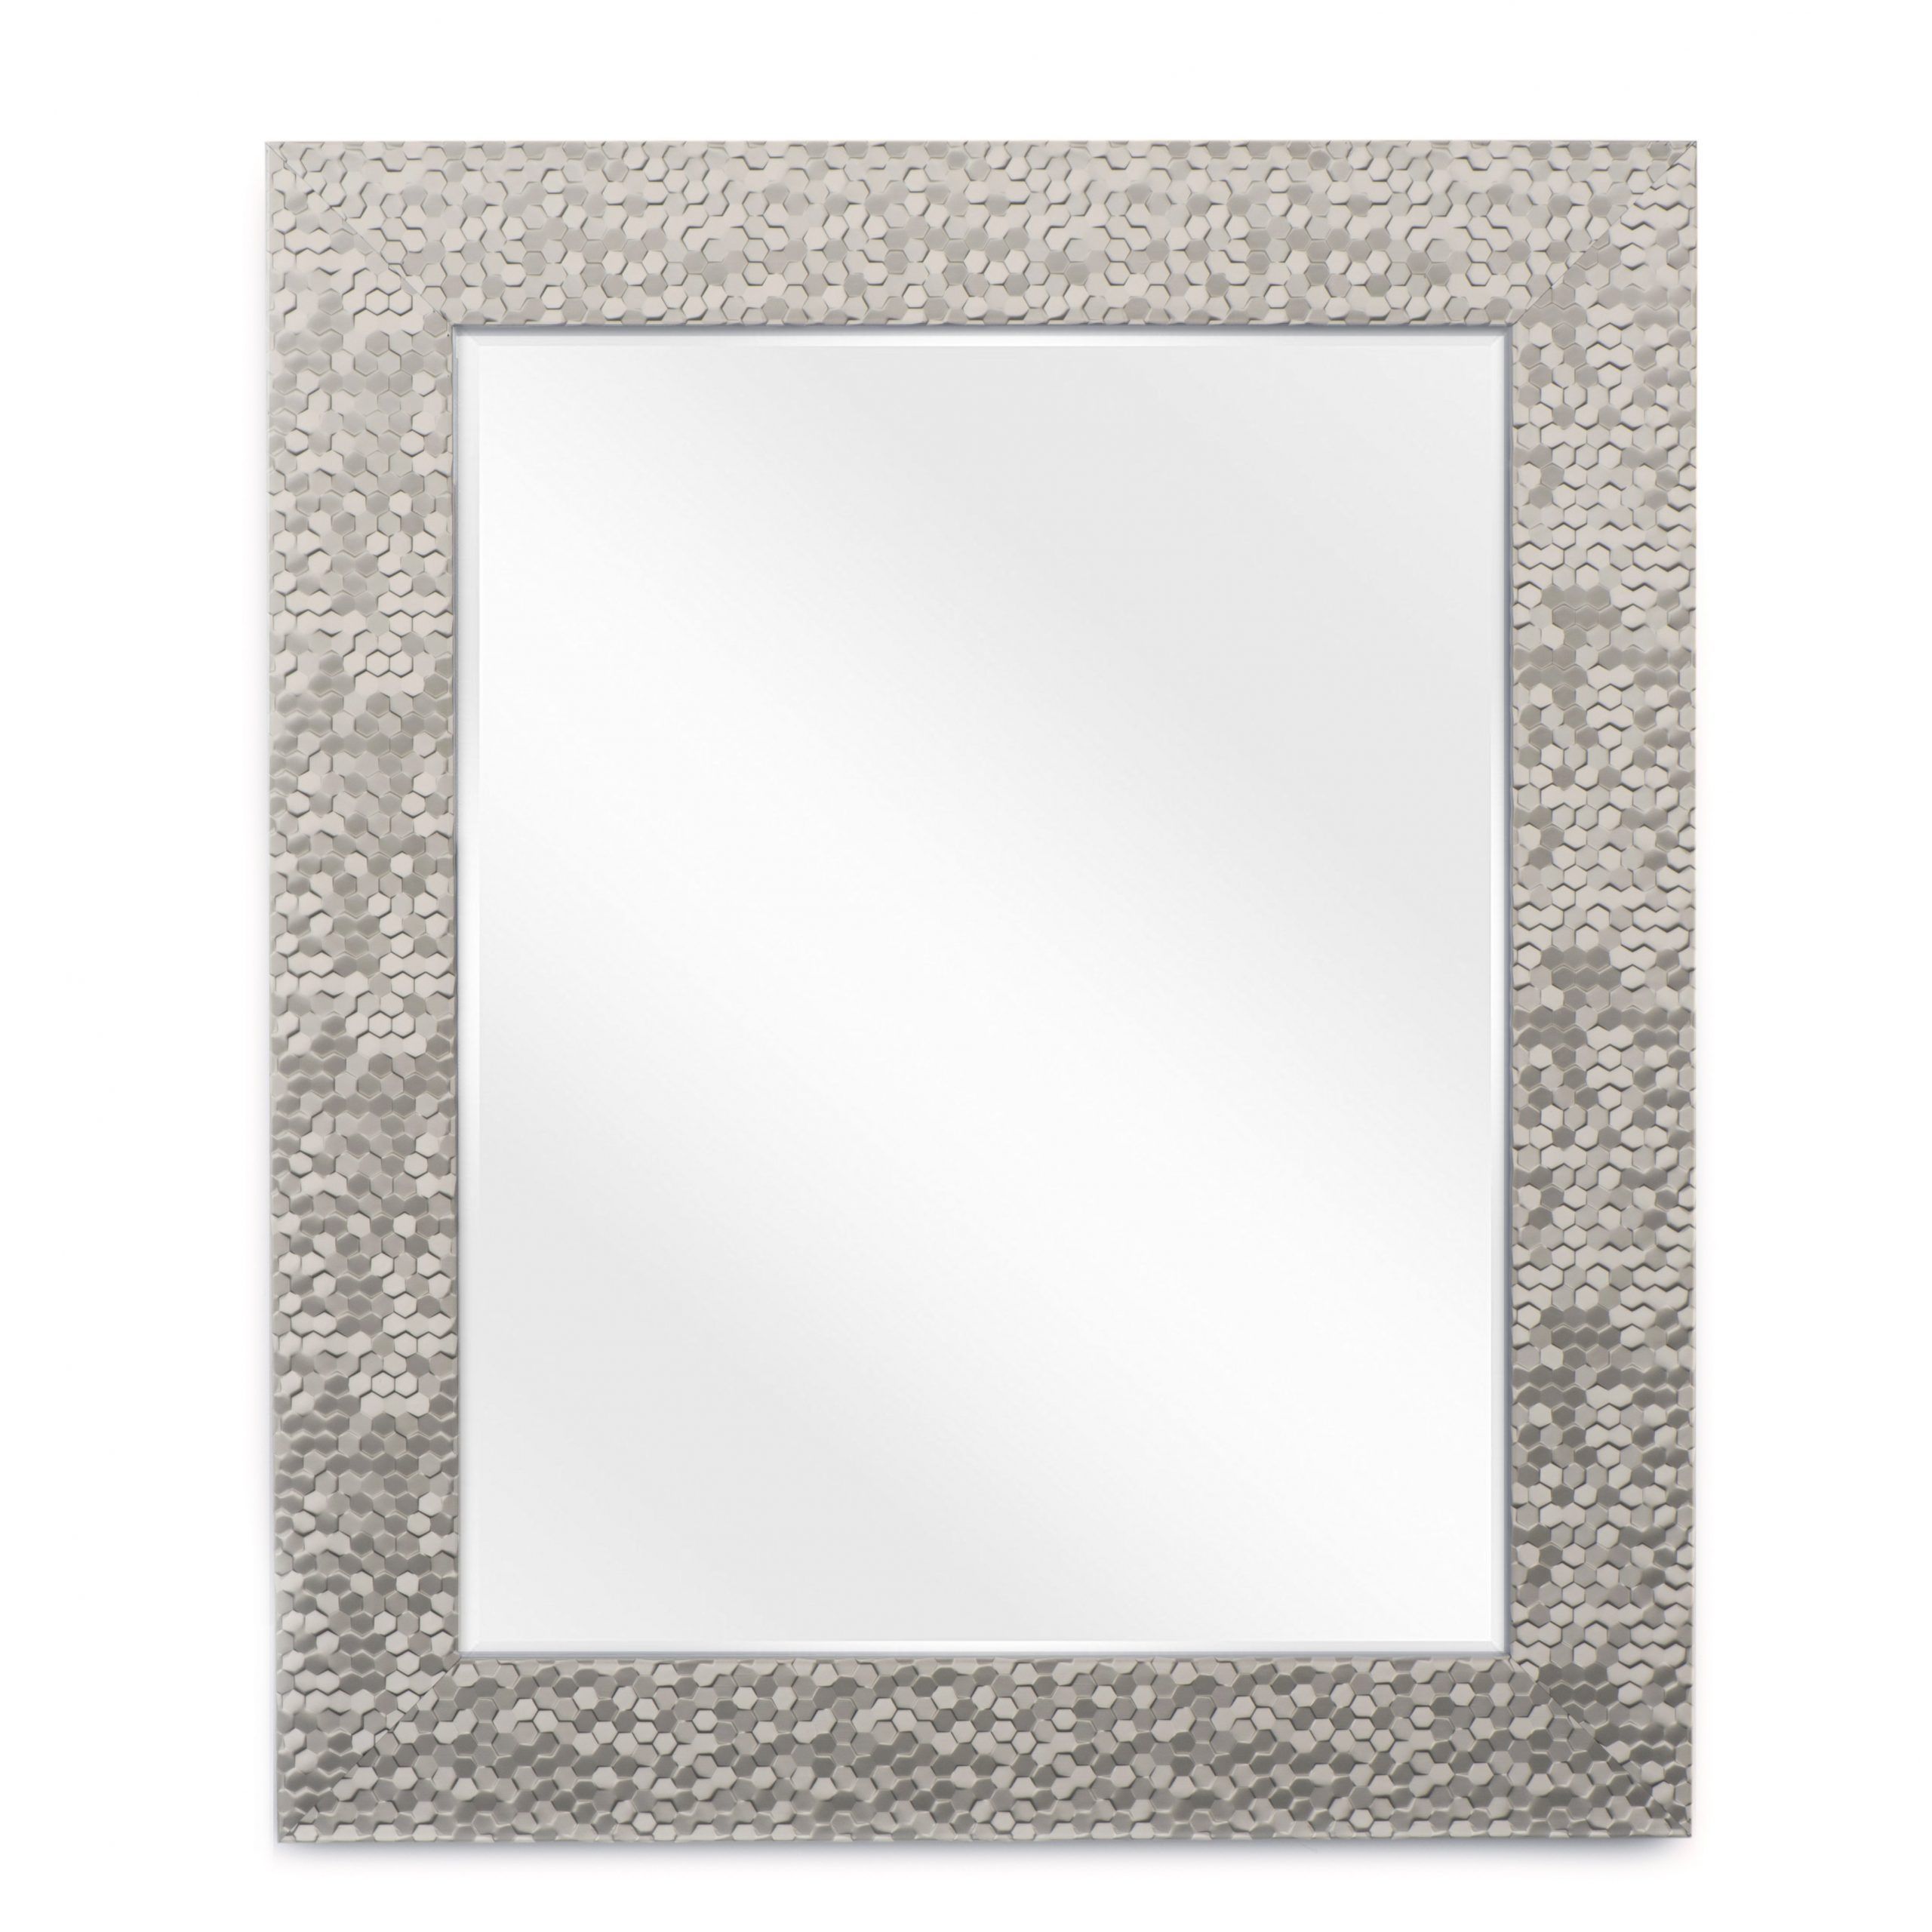 Wall Mirror For Bathroom Or Vanity , 21x25 Brushed Nickel – Walmart With Regard To Brushed Nickel Octagon Mirrors (View 11 of 15)